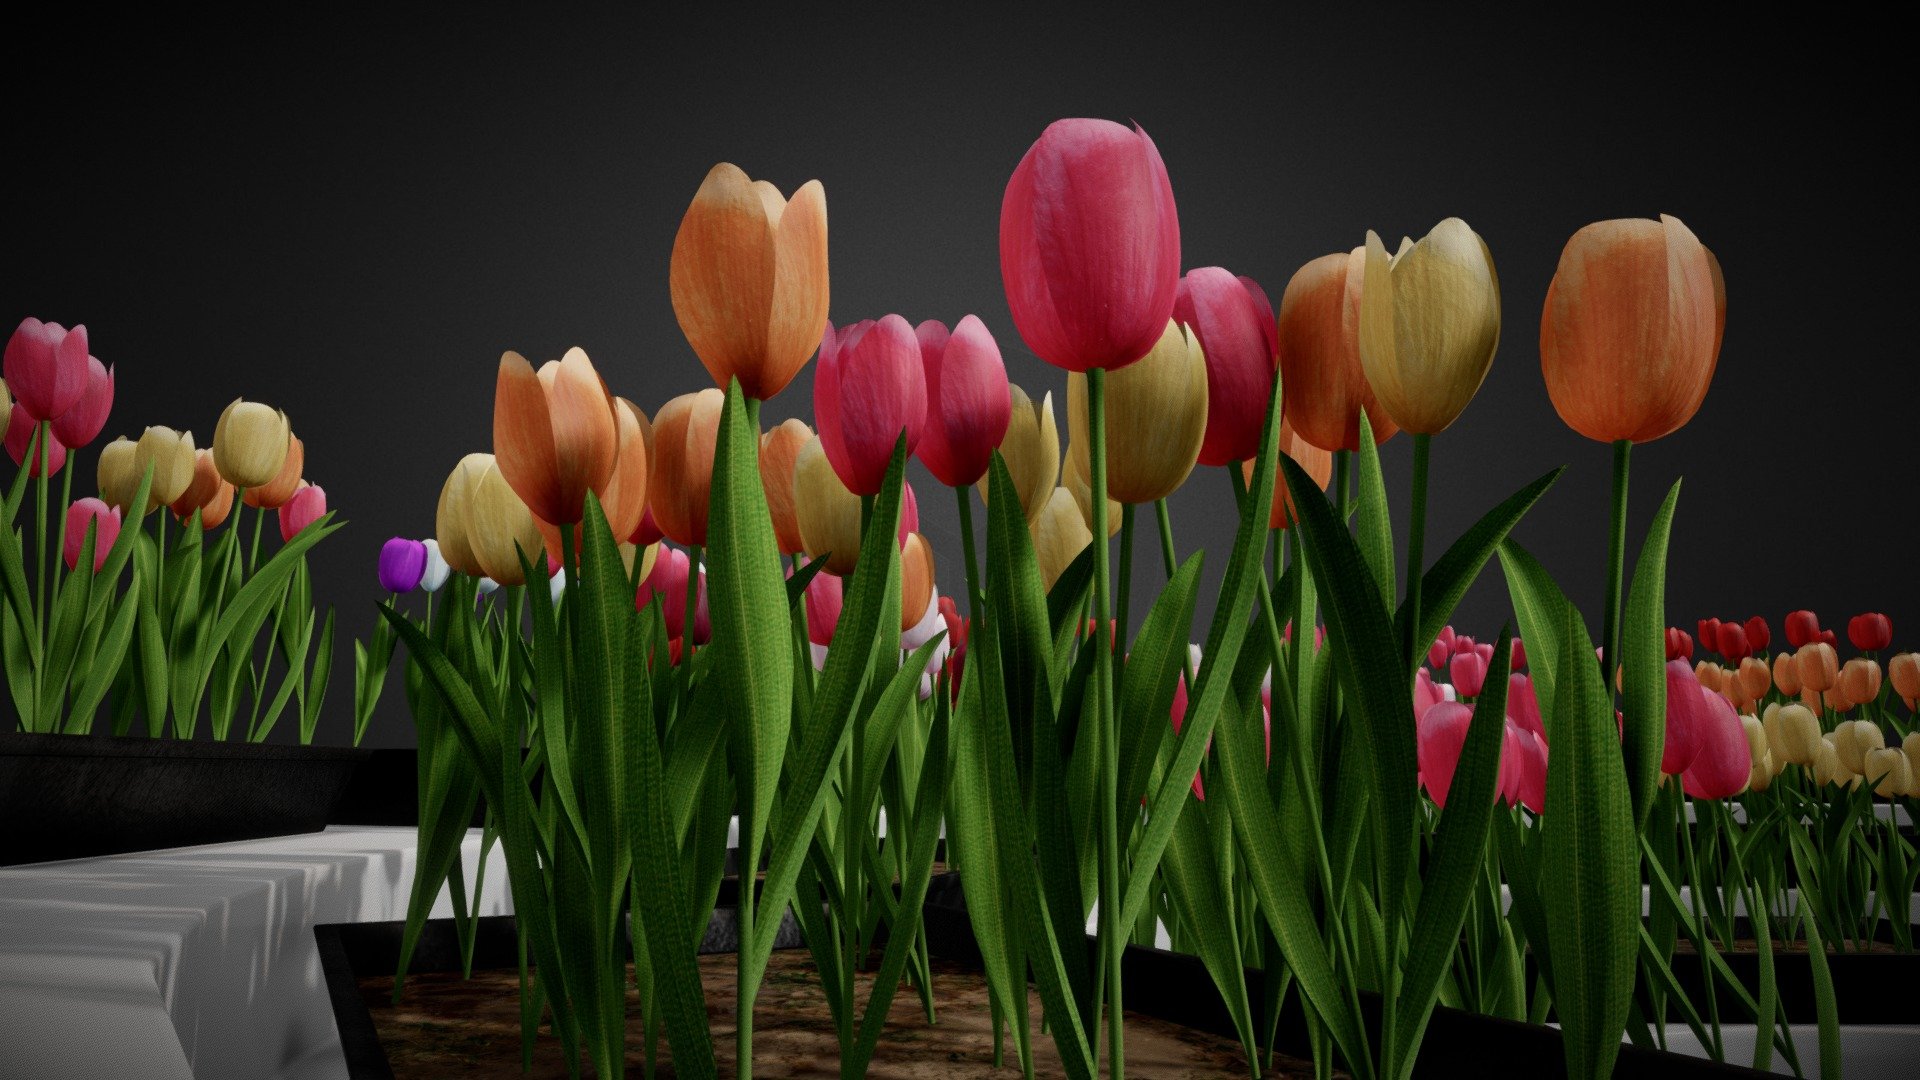 Tulips Collection



Asset Pack Description:-



Tulips with different color Variations.

Pot Meshes with Tulips

fbx Included

Textures included with all Petals color Variations


Additional Files Structure



Export Folder contain all the fbx model

Texture folder contain all the Textures

Tulips Collection Blend File and Export Blend File


Thank You!
Contact me:nk.vmc.s@gmail.com - Tulips Collection - Buy Royalty Free 3D model by Nicholas-3D (@Nicholas01) 3d model